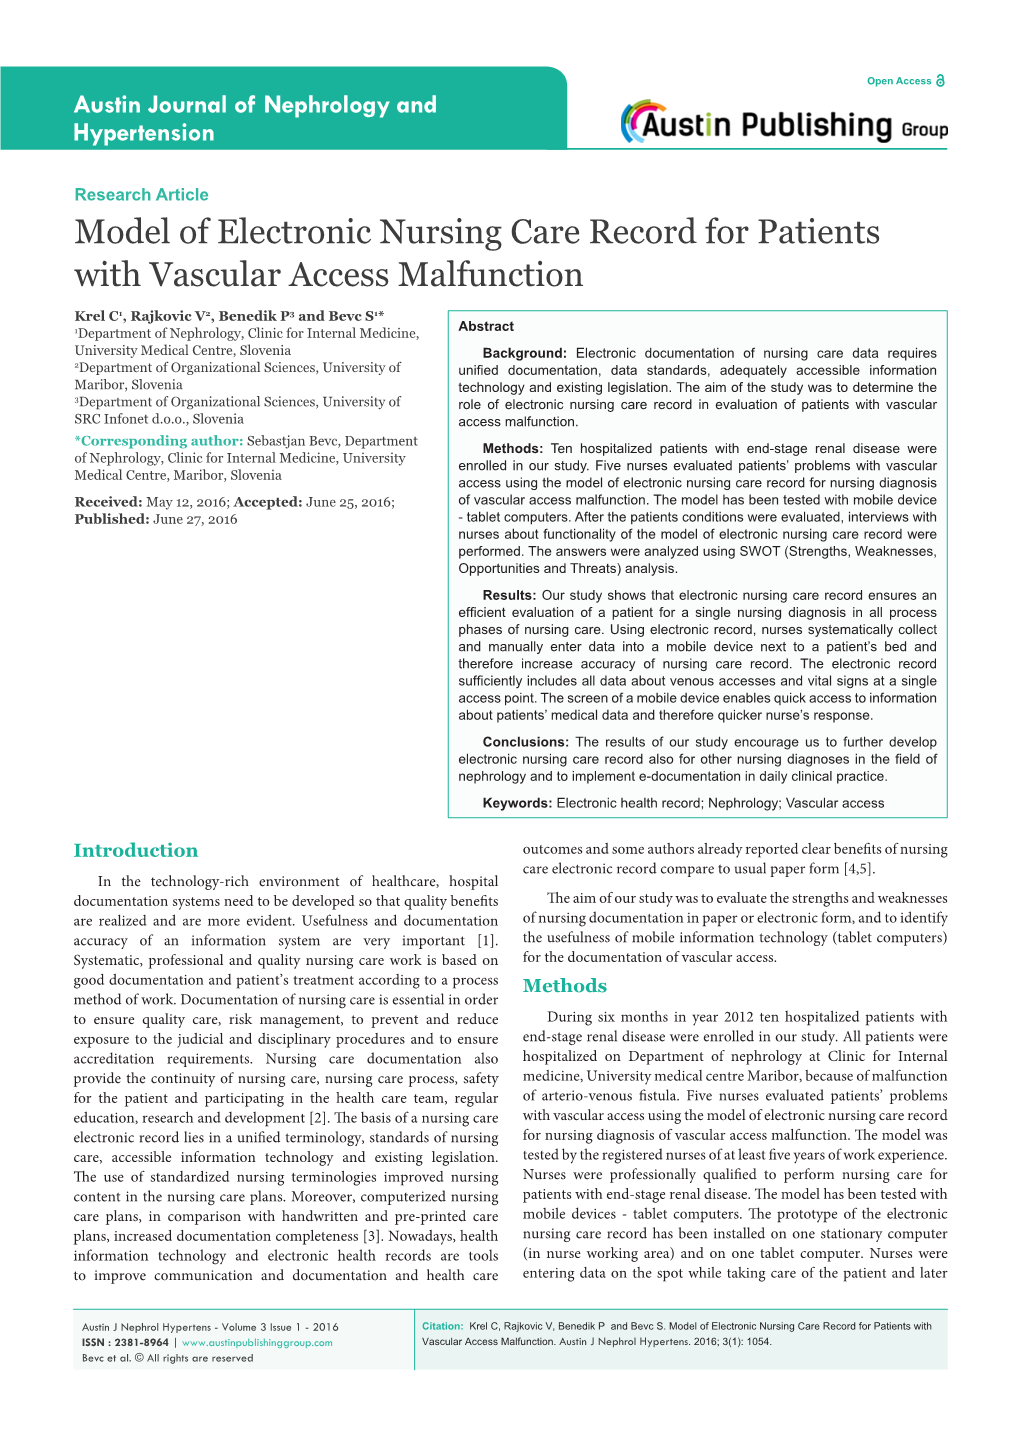 Model of Electronic Nursing Care Record for Patients with Vascular Access Malfunction